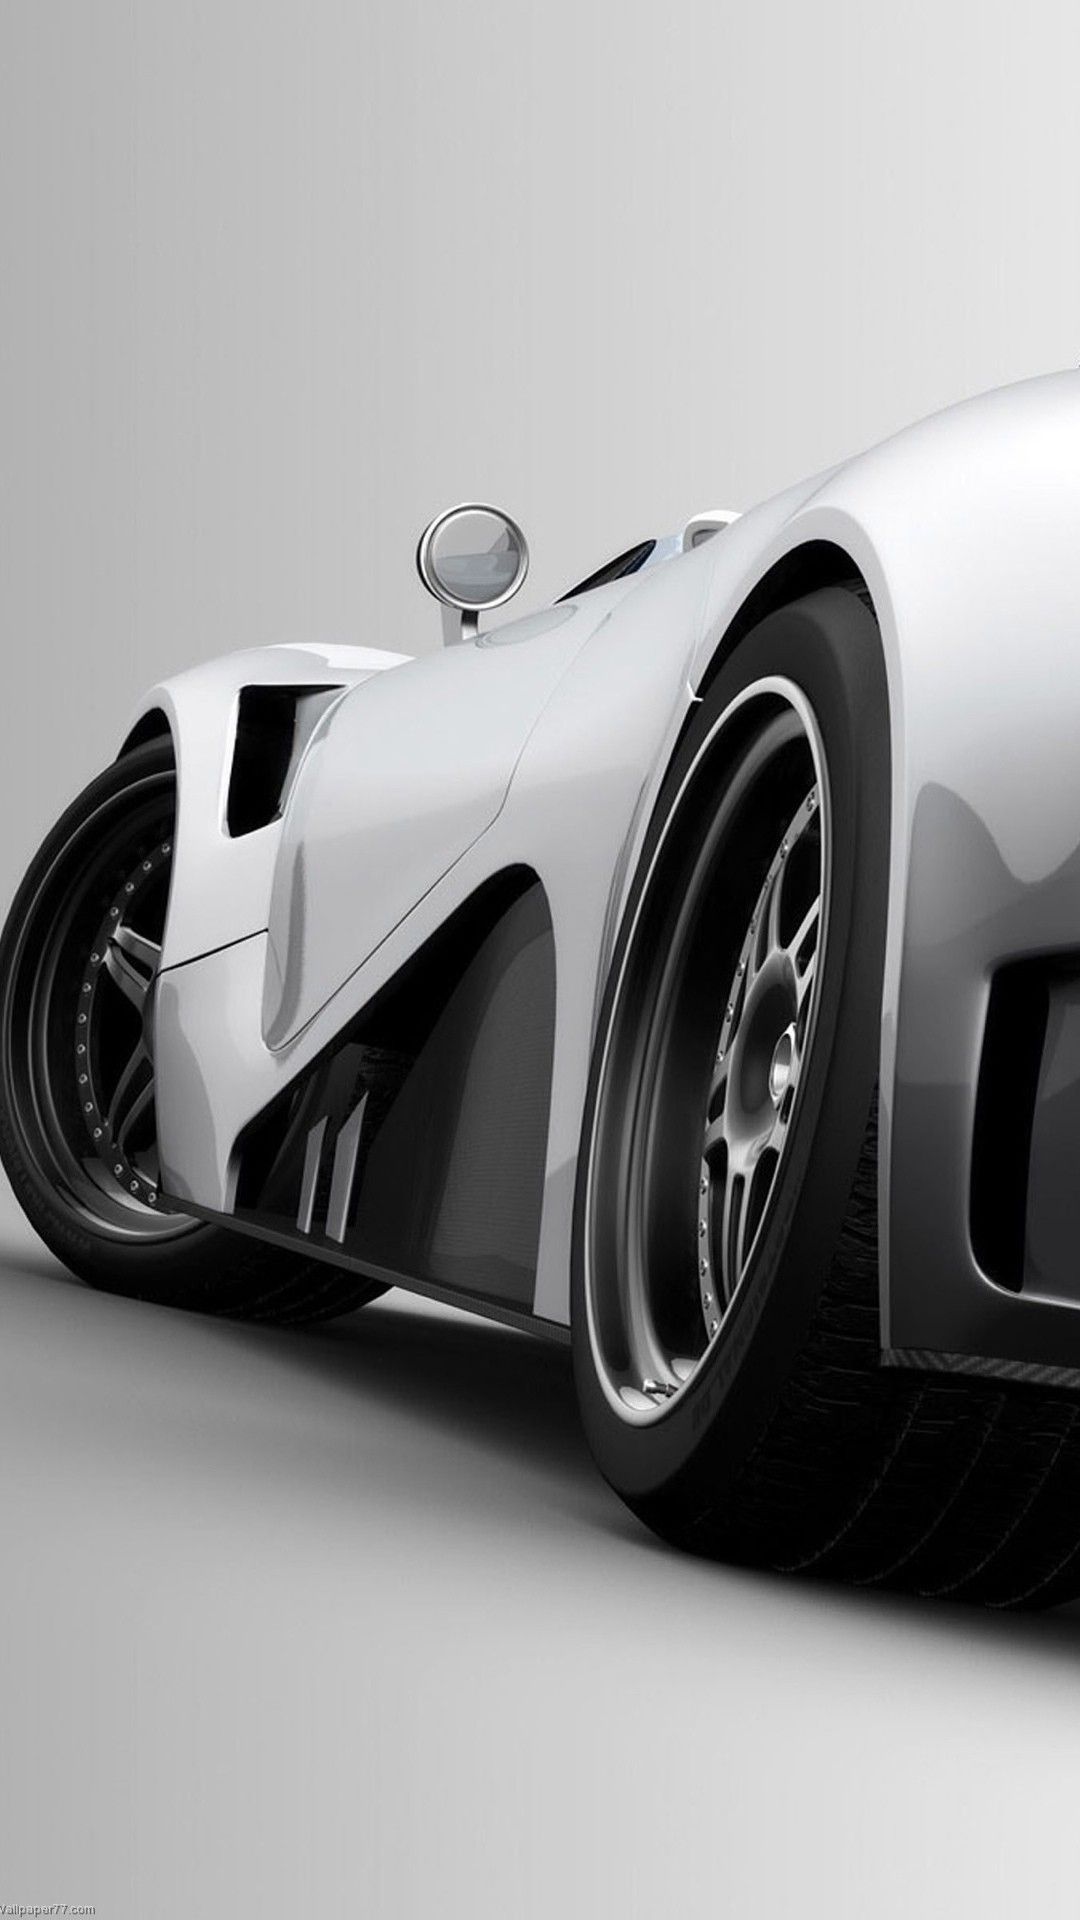 Black and White Super Sport Car Android and iPhone Wallpaper